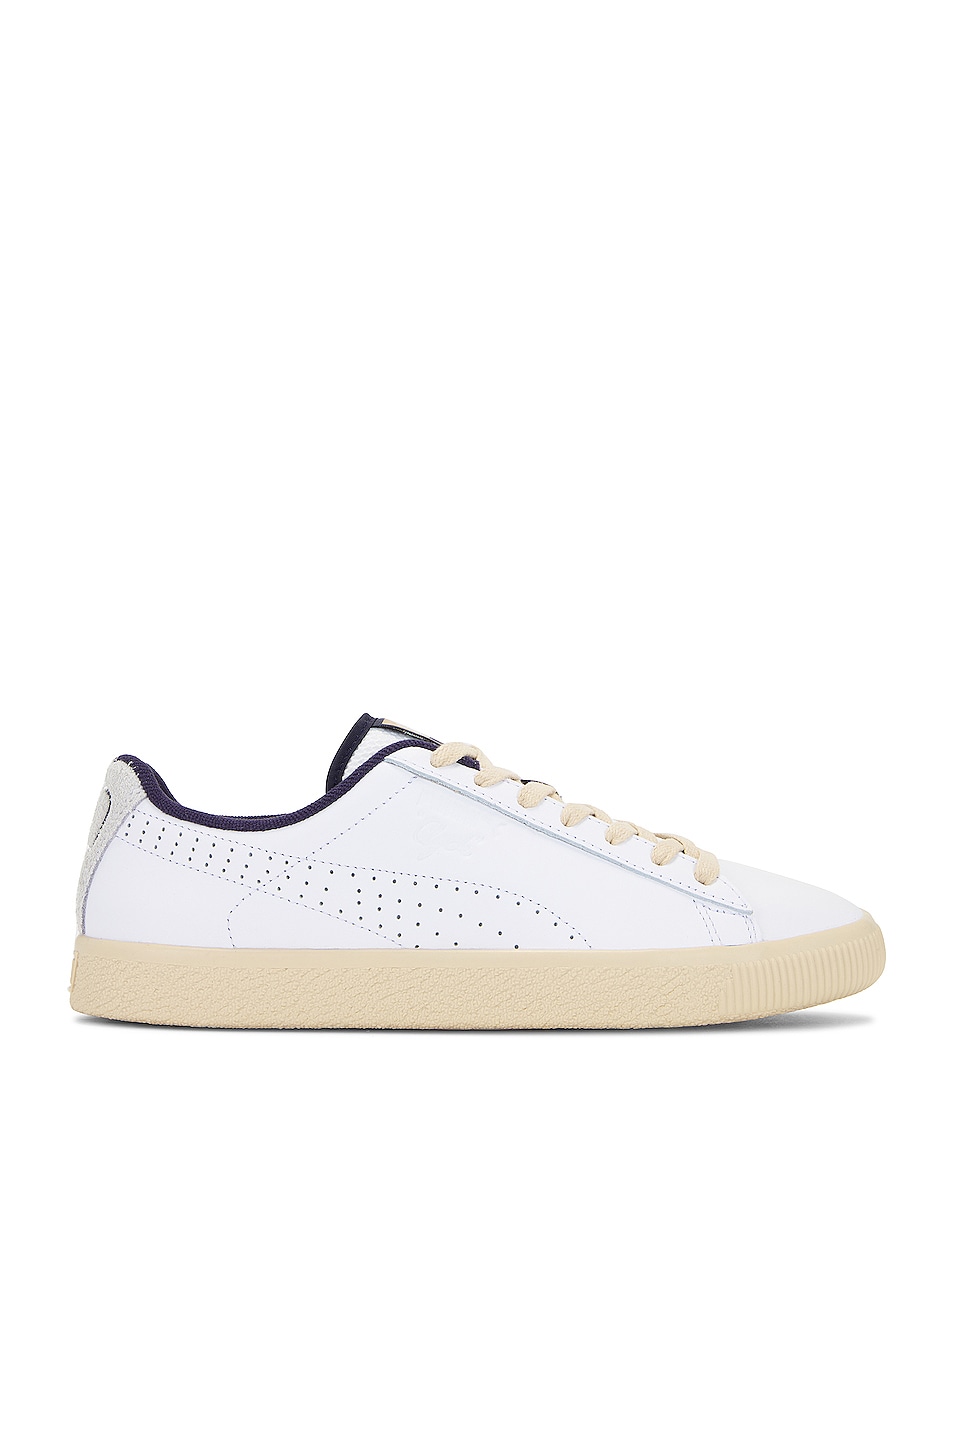 Image 1 of Puma Select Clyde Baseline Sneaker in White